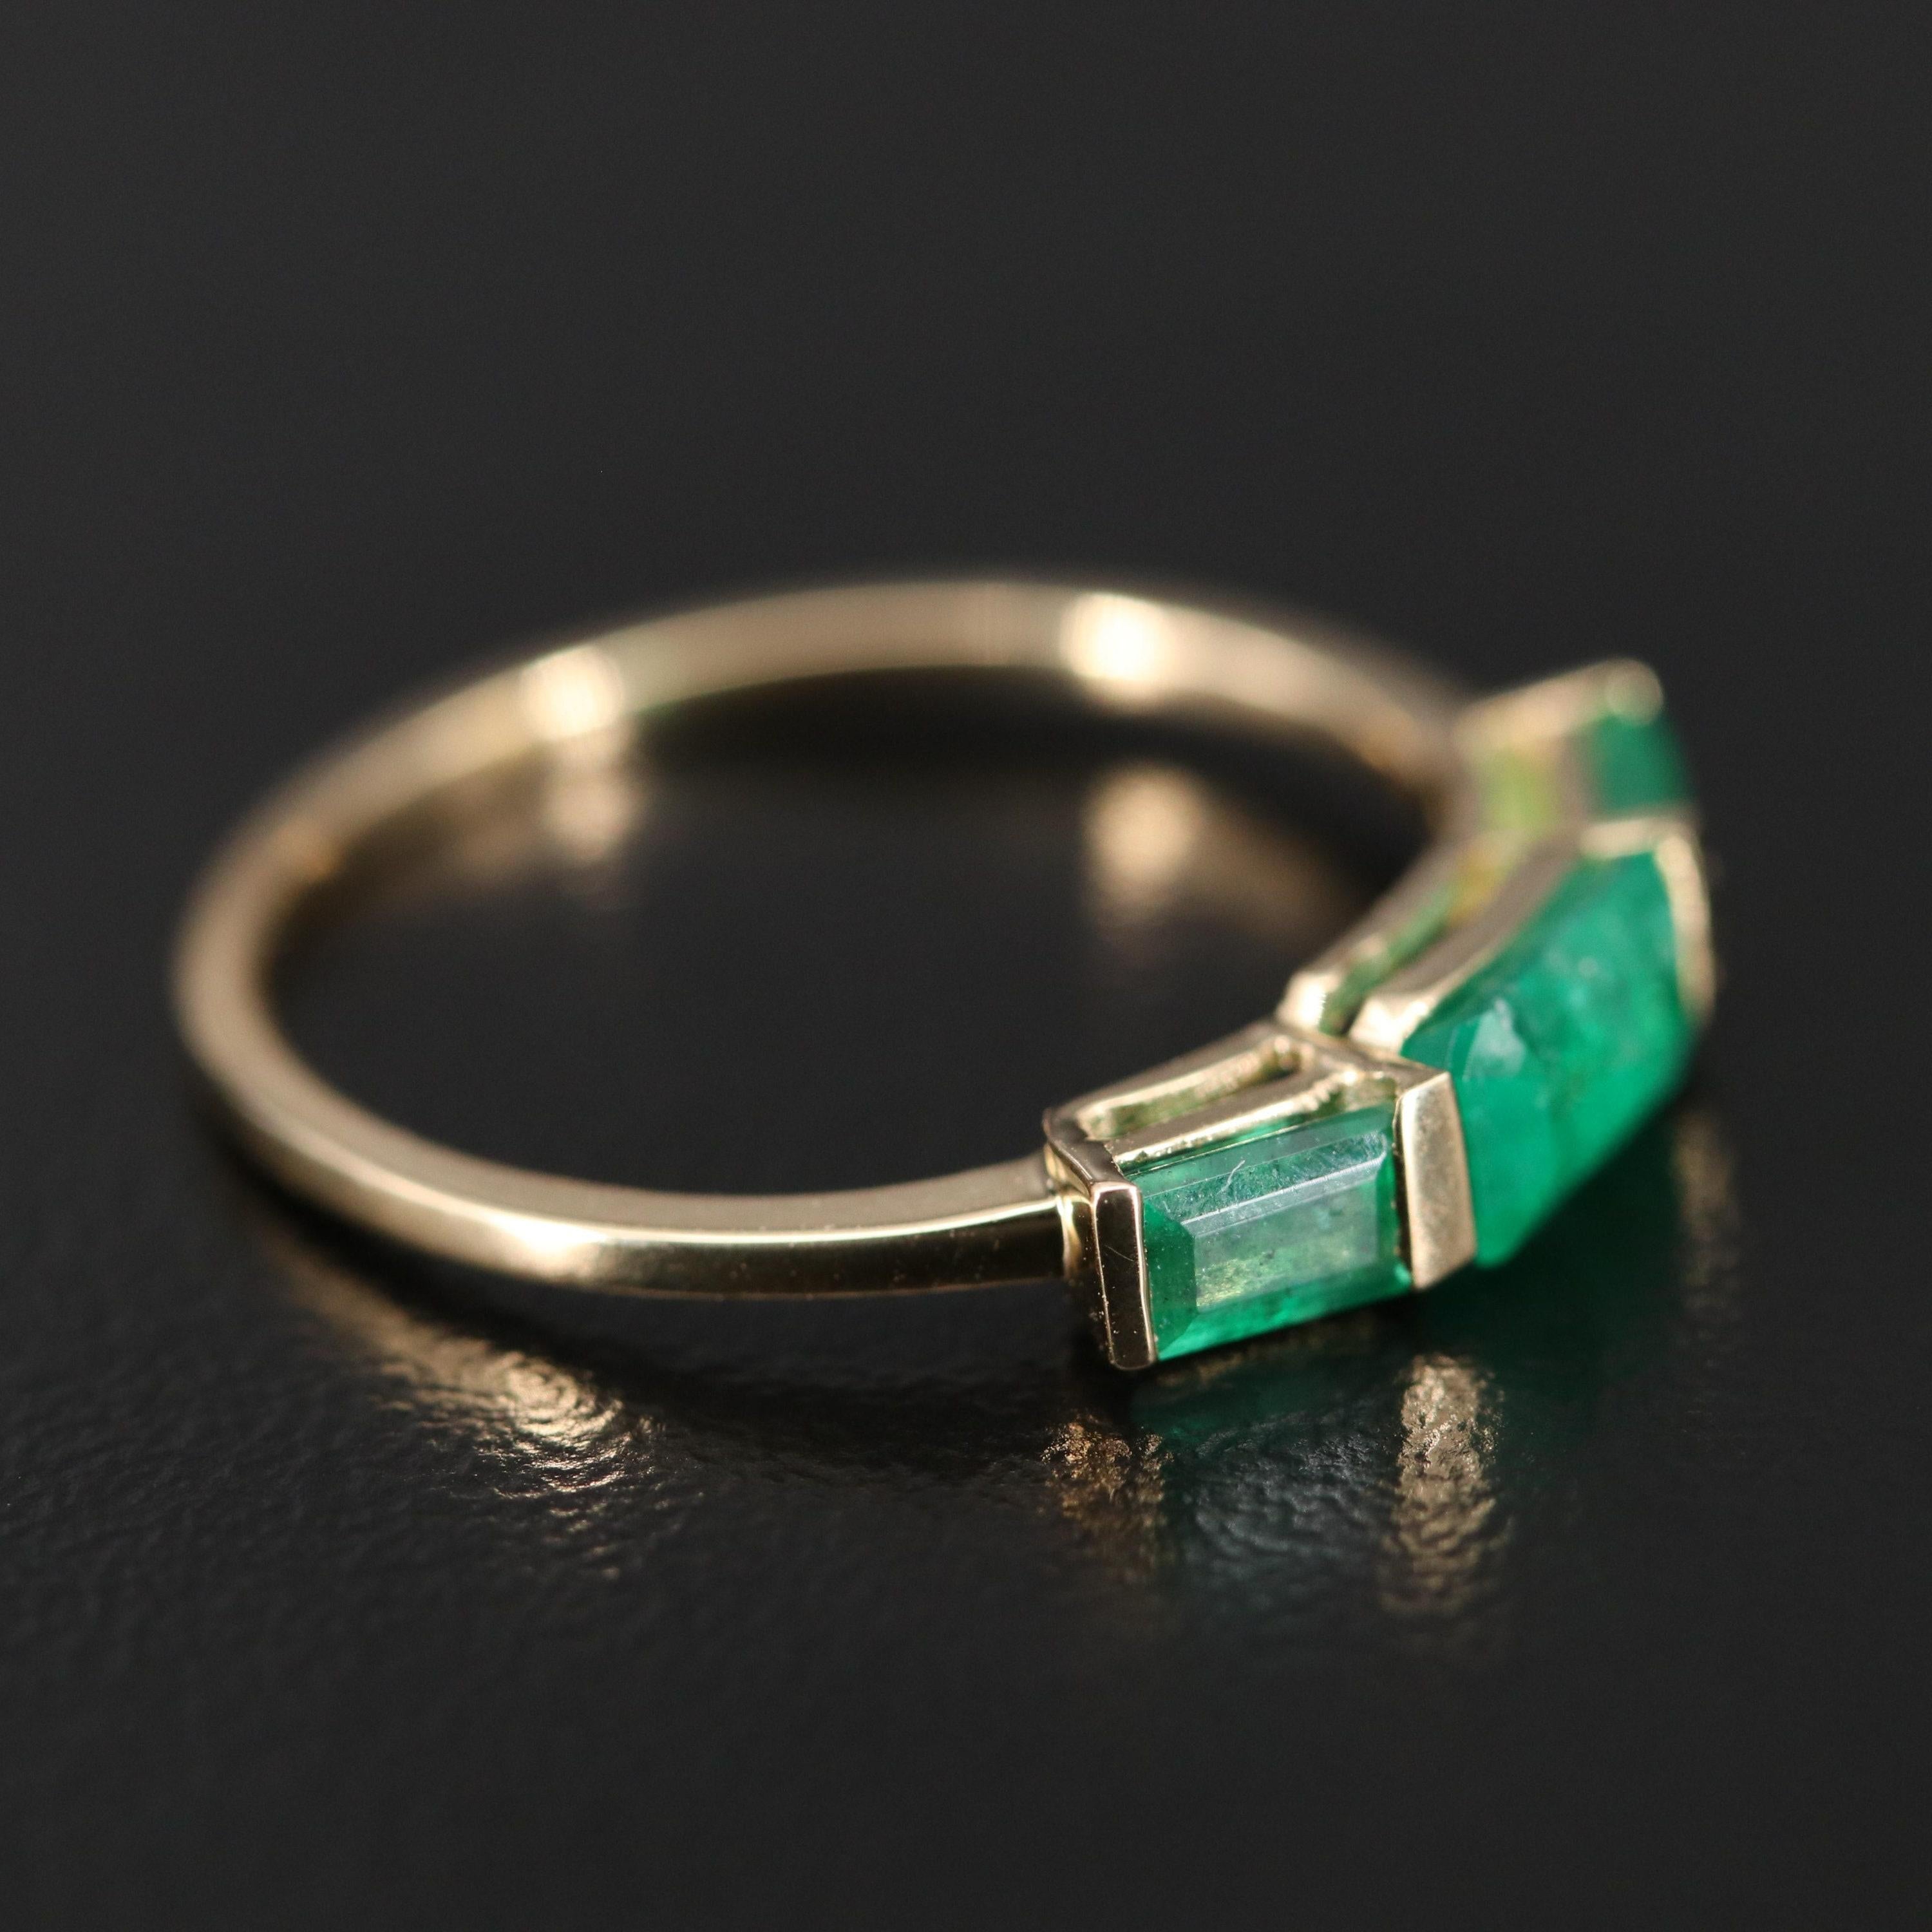 For Sale:  18K Gold 3 CT Natural Emerald Art Deco Style Engagement Ring, Fashion Band Rings 3